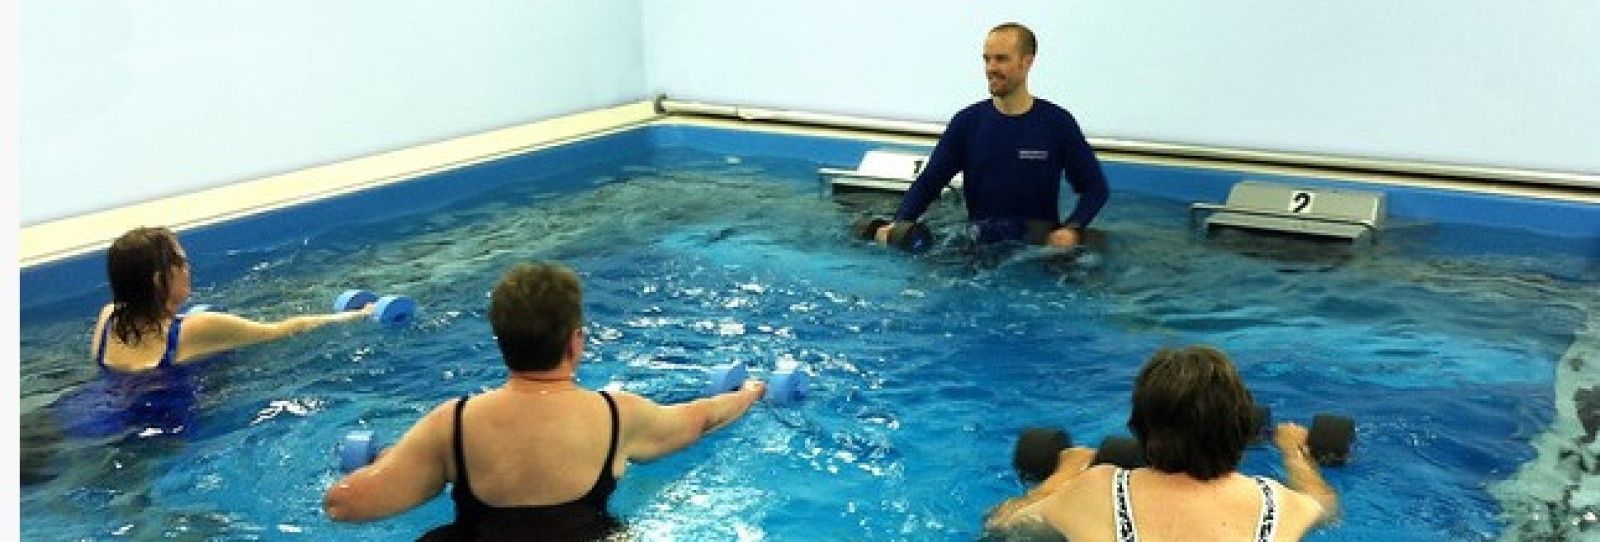 Hydrotherapy pool banner image